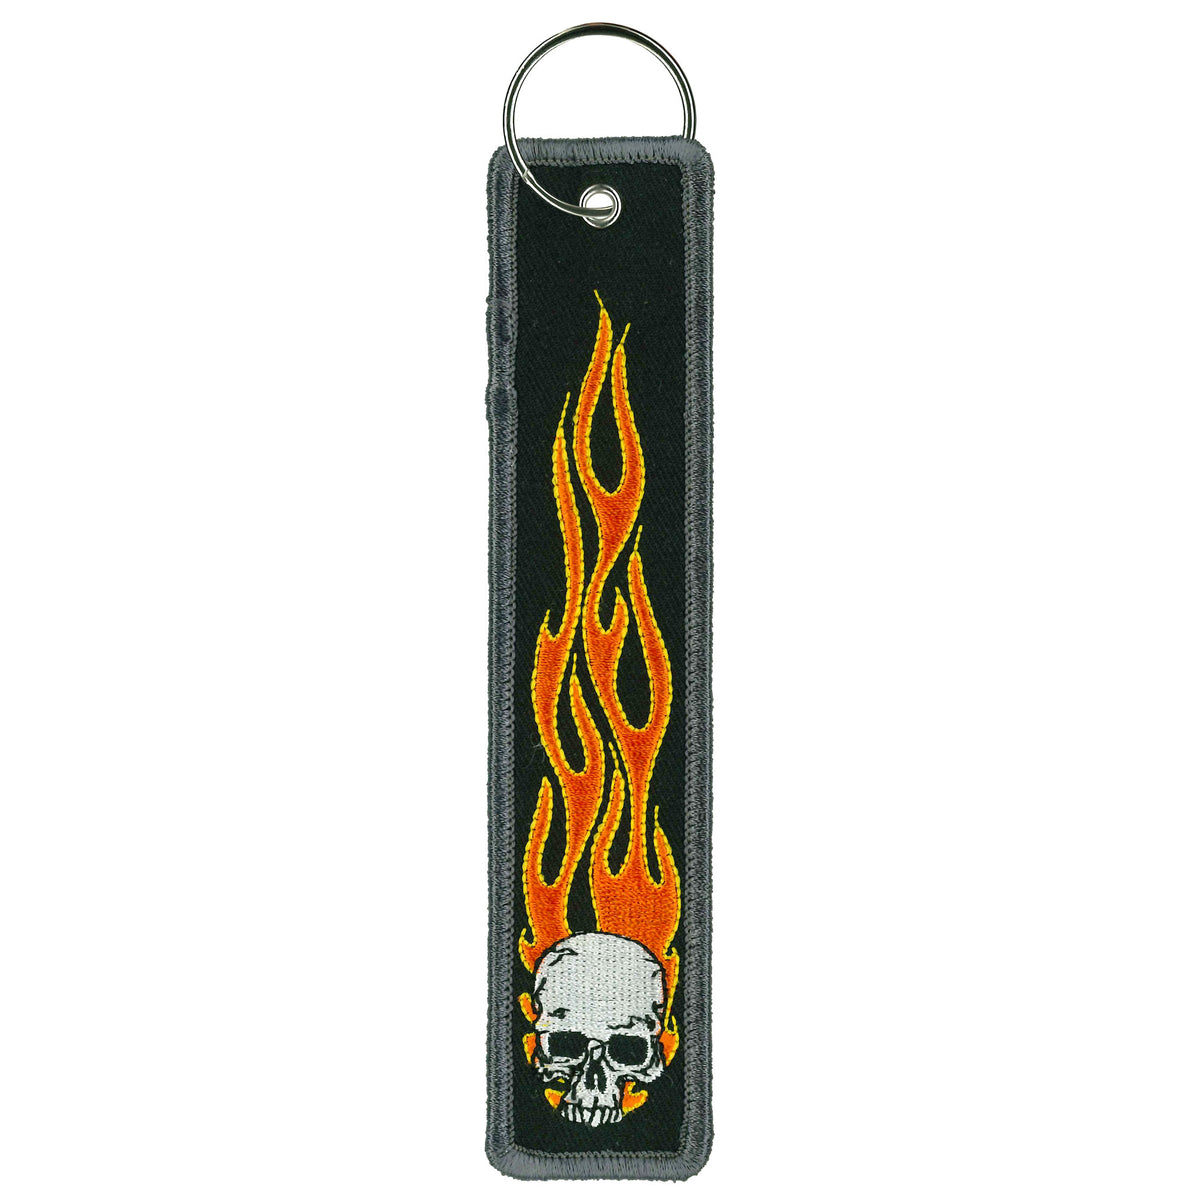 Hot Leathers Flame Skull Key Chain Fob